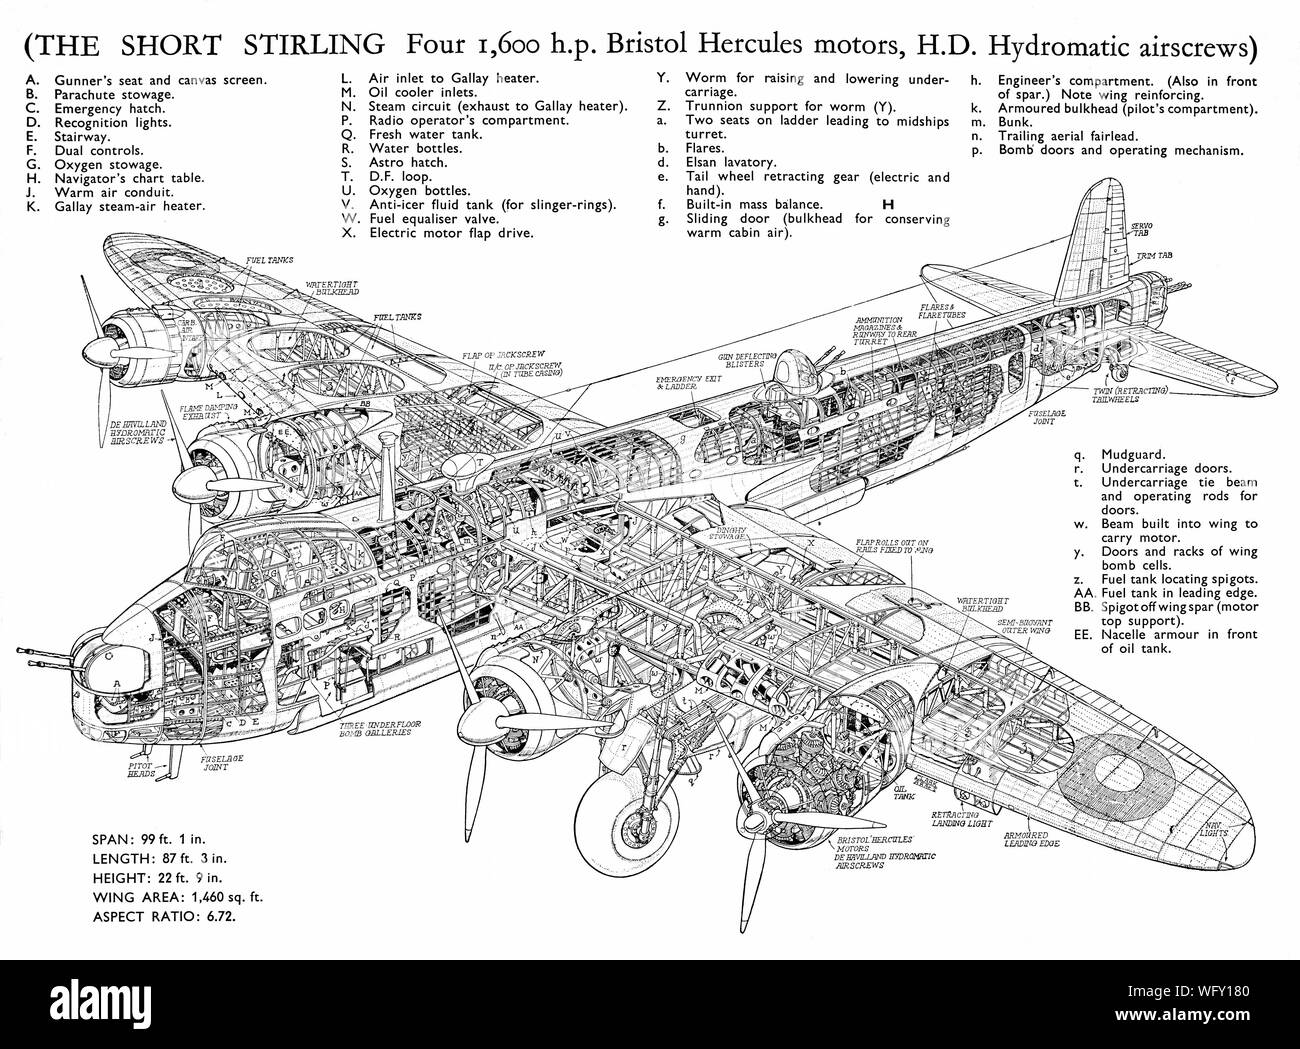 An exploded view of the Short Stirling, the four-engined heavy bomber of the Second World War. It has the distinction of being the first four-engined bomber to be introduced into service with the Royal Air Force. During early 1941, the Stirling entered squadron service. During its use as a bomber, pilots praised the type for its ability to out-turn enemy night fighters and its favourable handling characteristics, while the altitude ceiling was often a subject of criticism. The Stirling had a relatively brief operational career as a bomber before being relegated to second line duties from late Stock Photo